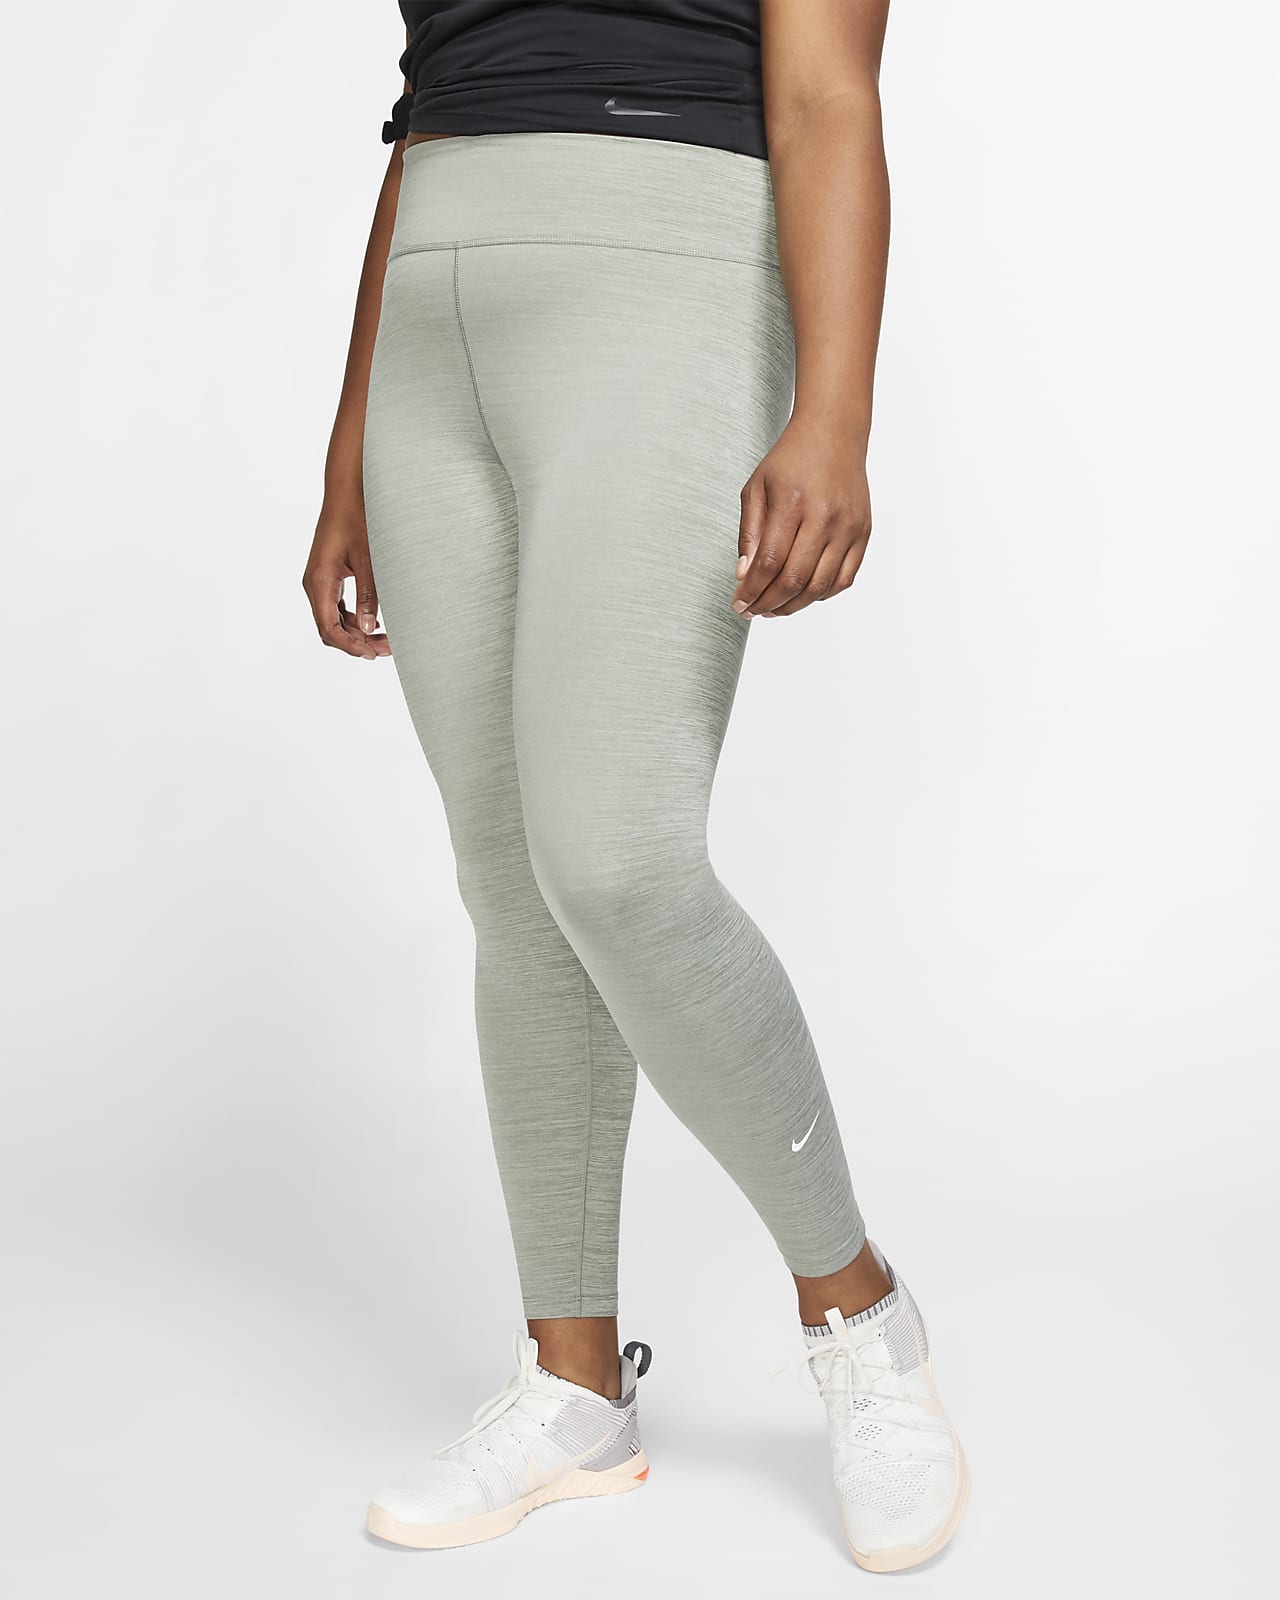 nike women's tights and leggings